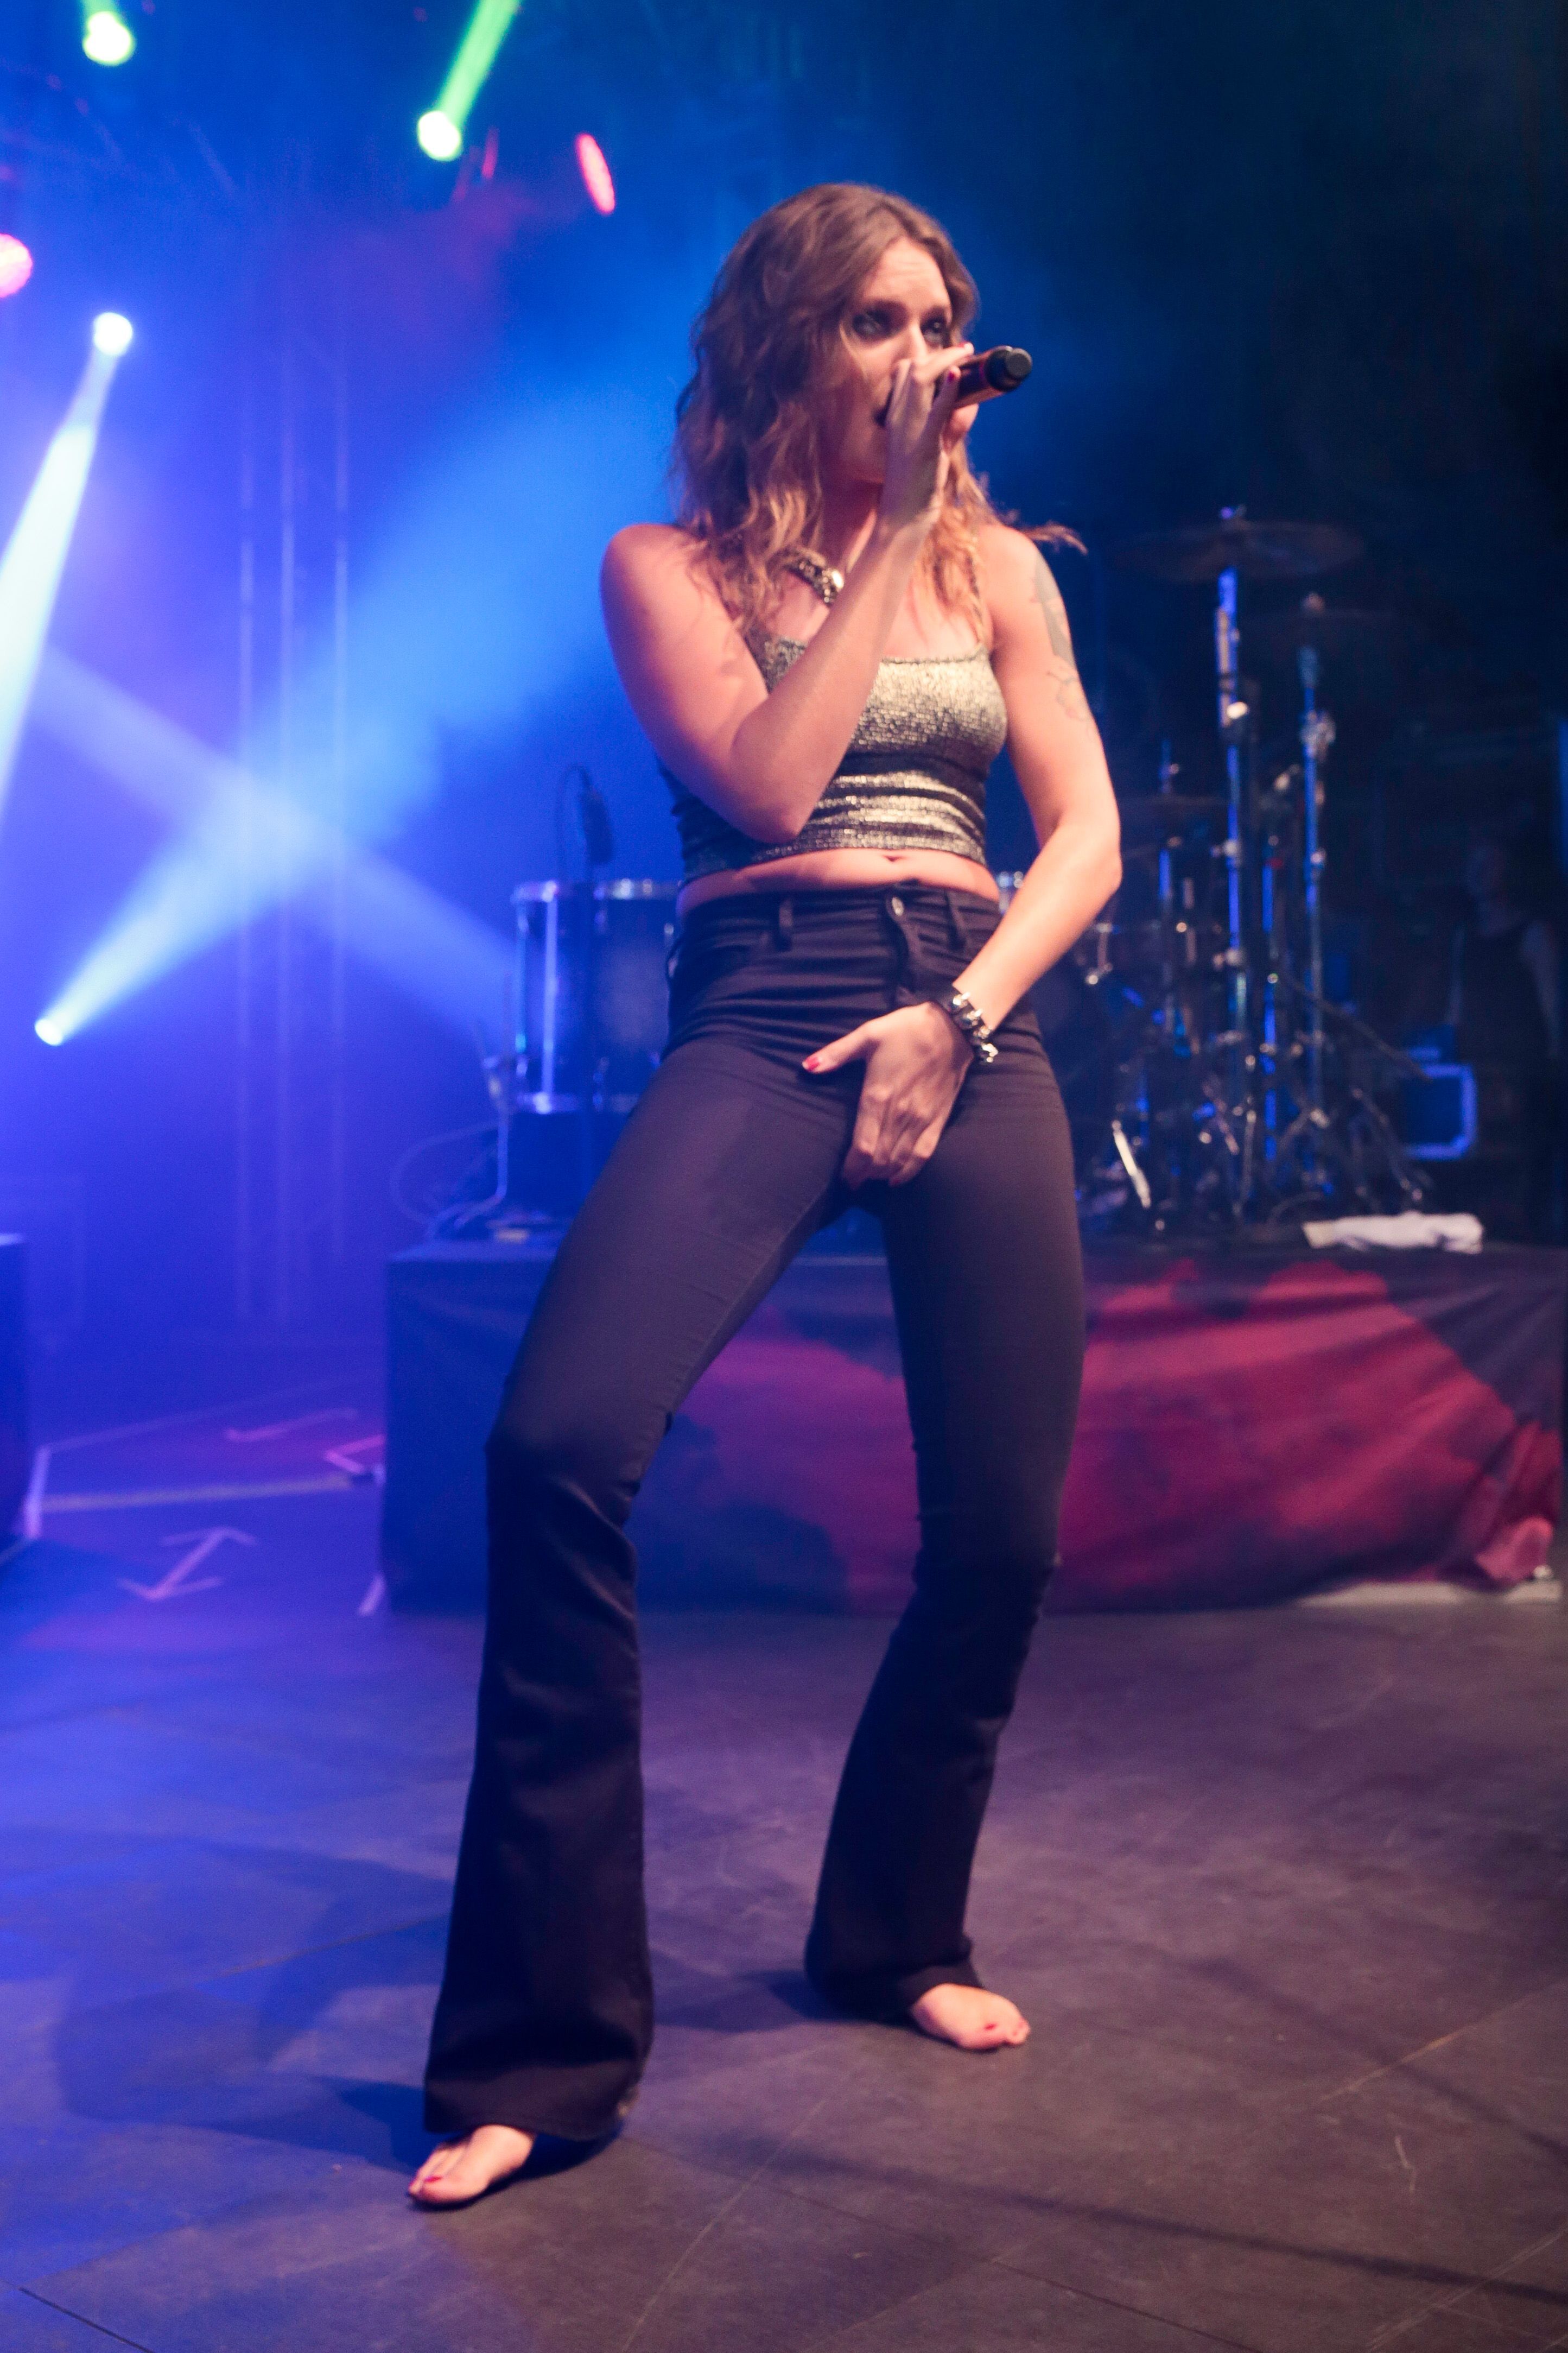 Tove Lo Flashing Her Tits While Performing In Rio De Janeiro アーティスト達の美しくセクシーな瞬間！artist Xnews